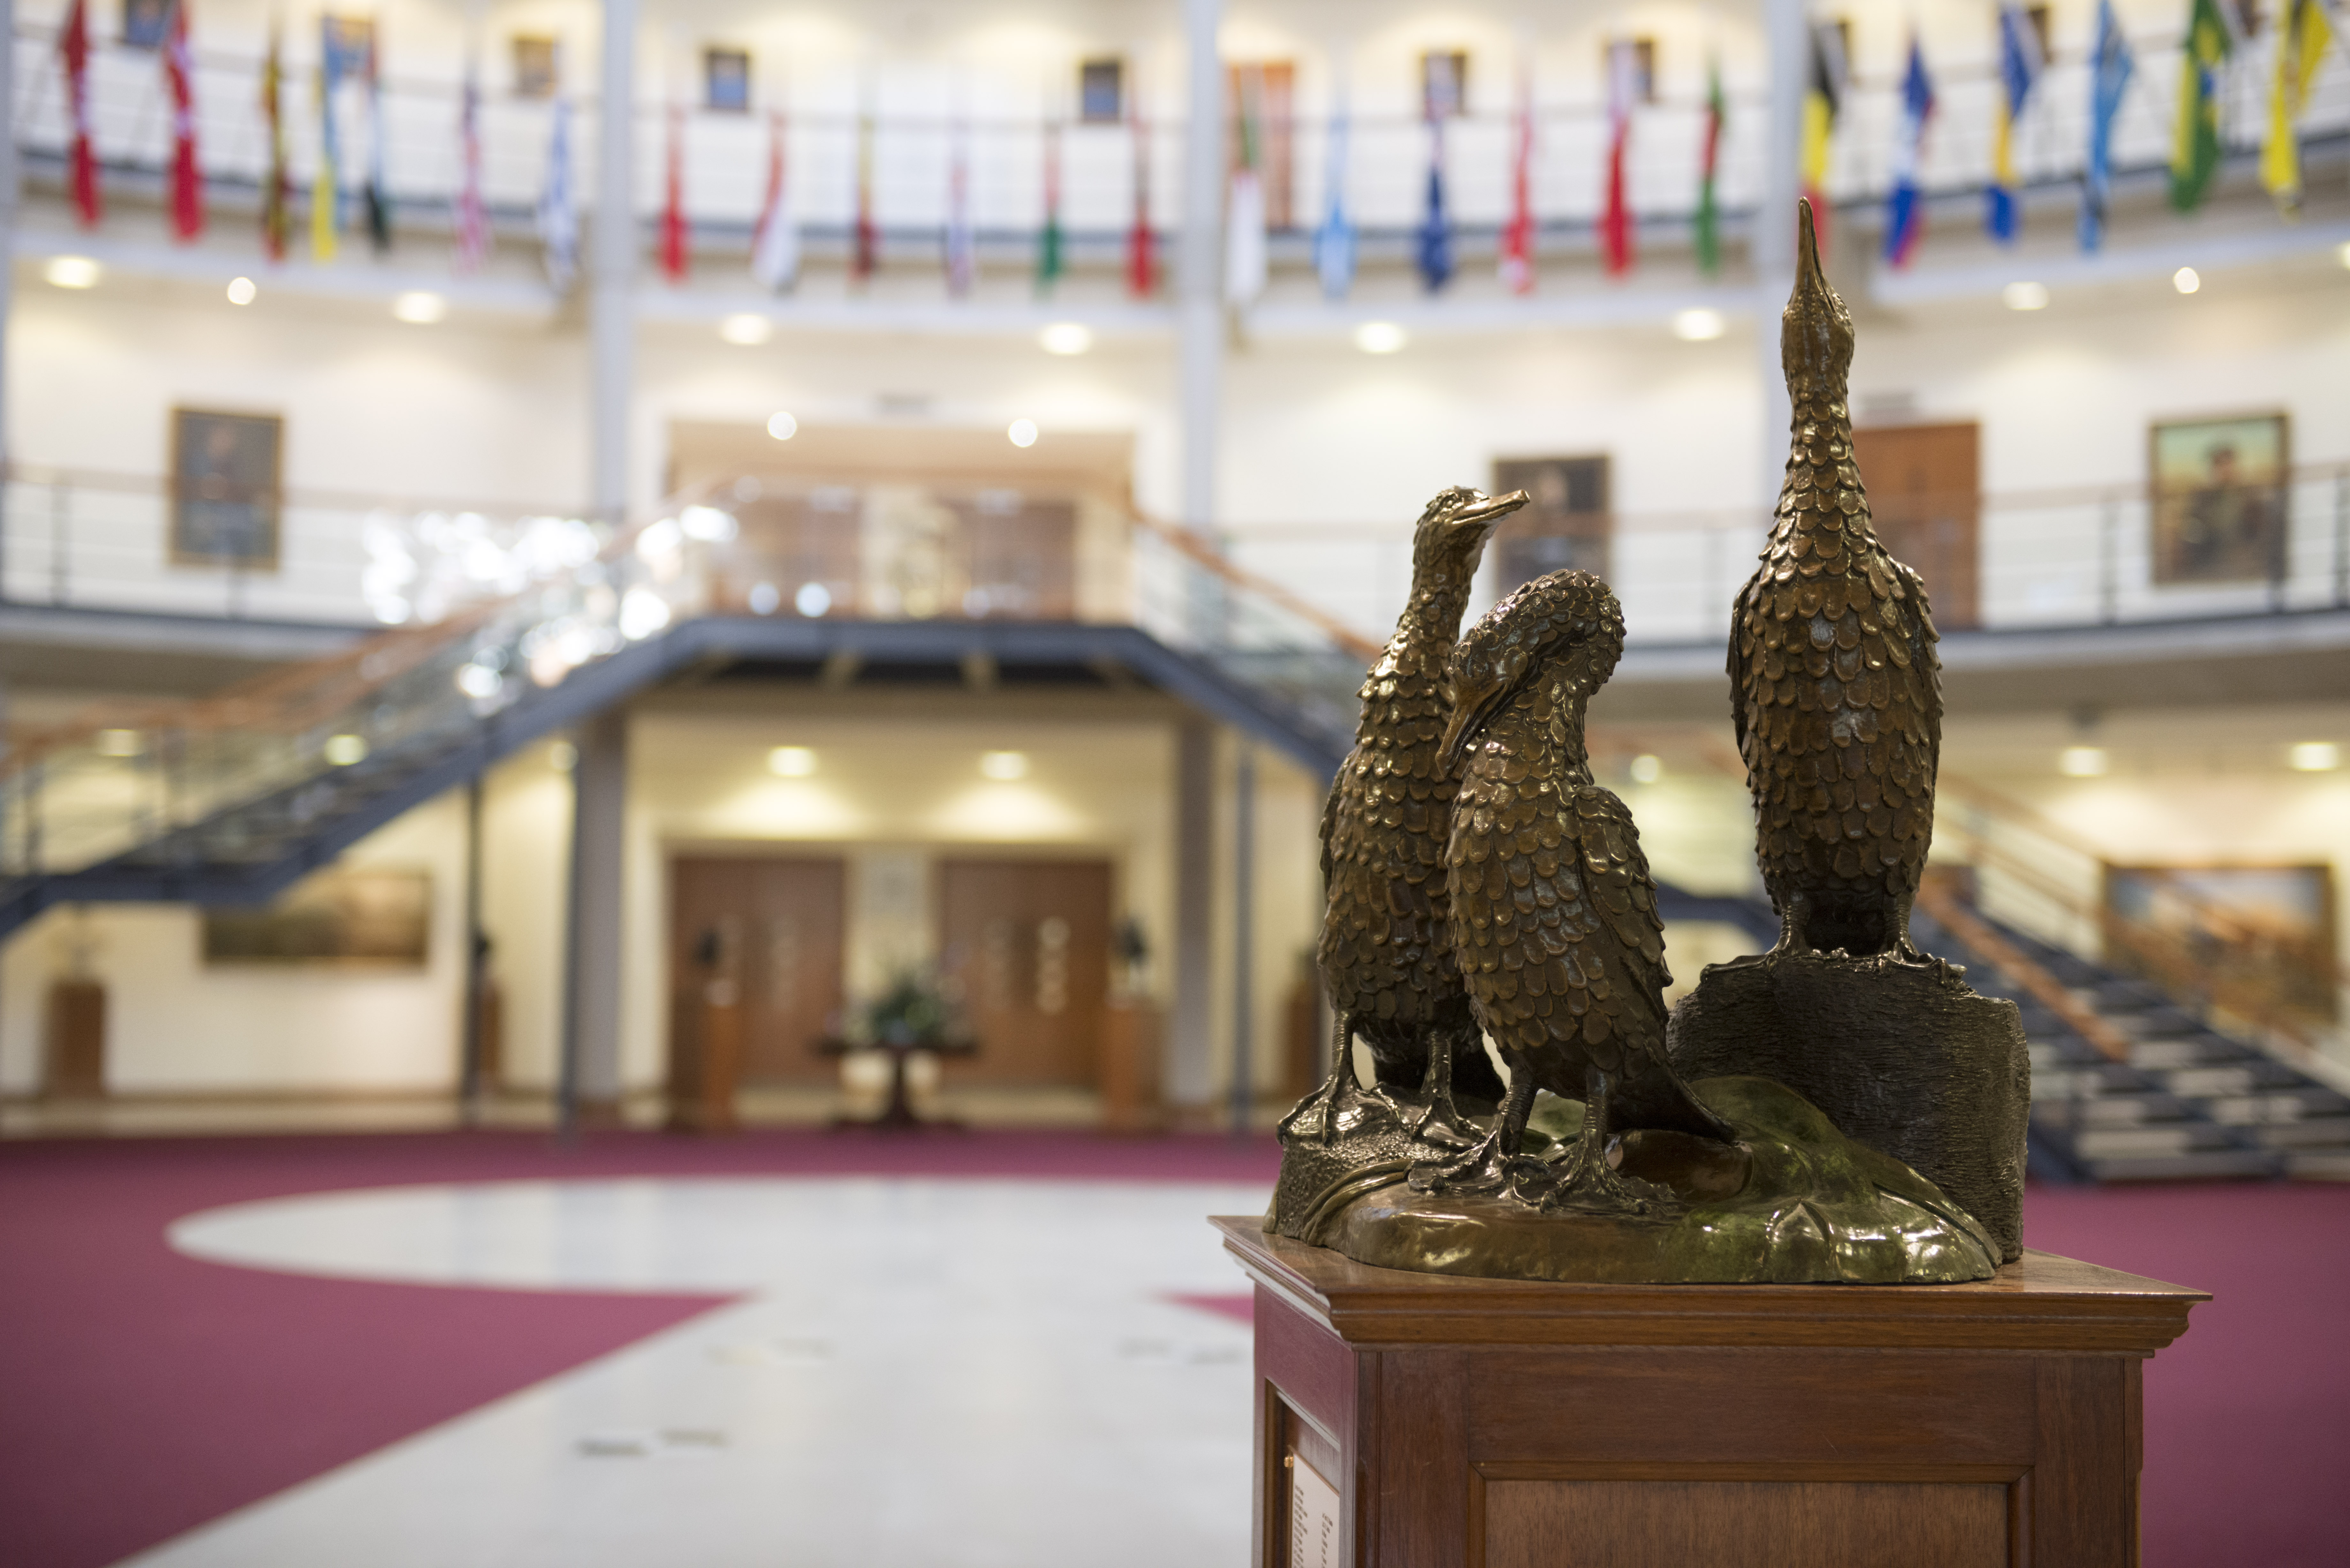 A gold statue of 3 cormorant birds inside a forum filled with multiple handing flags from around the world.